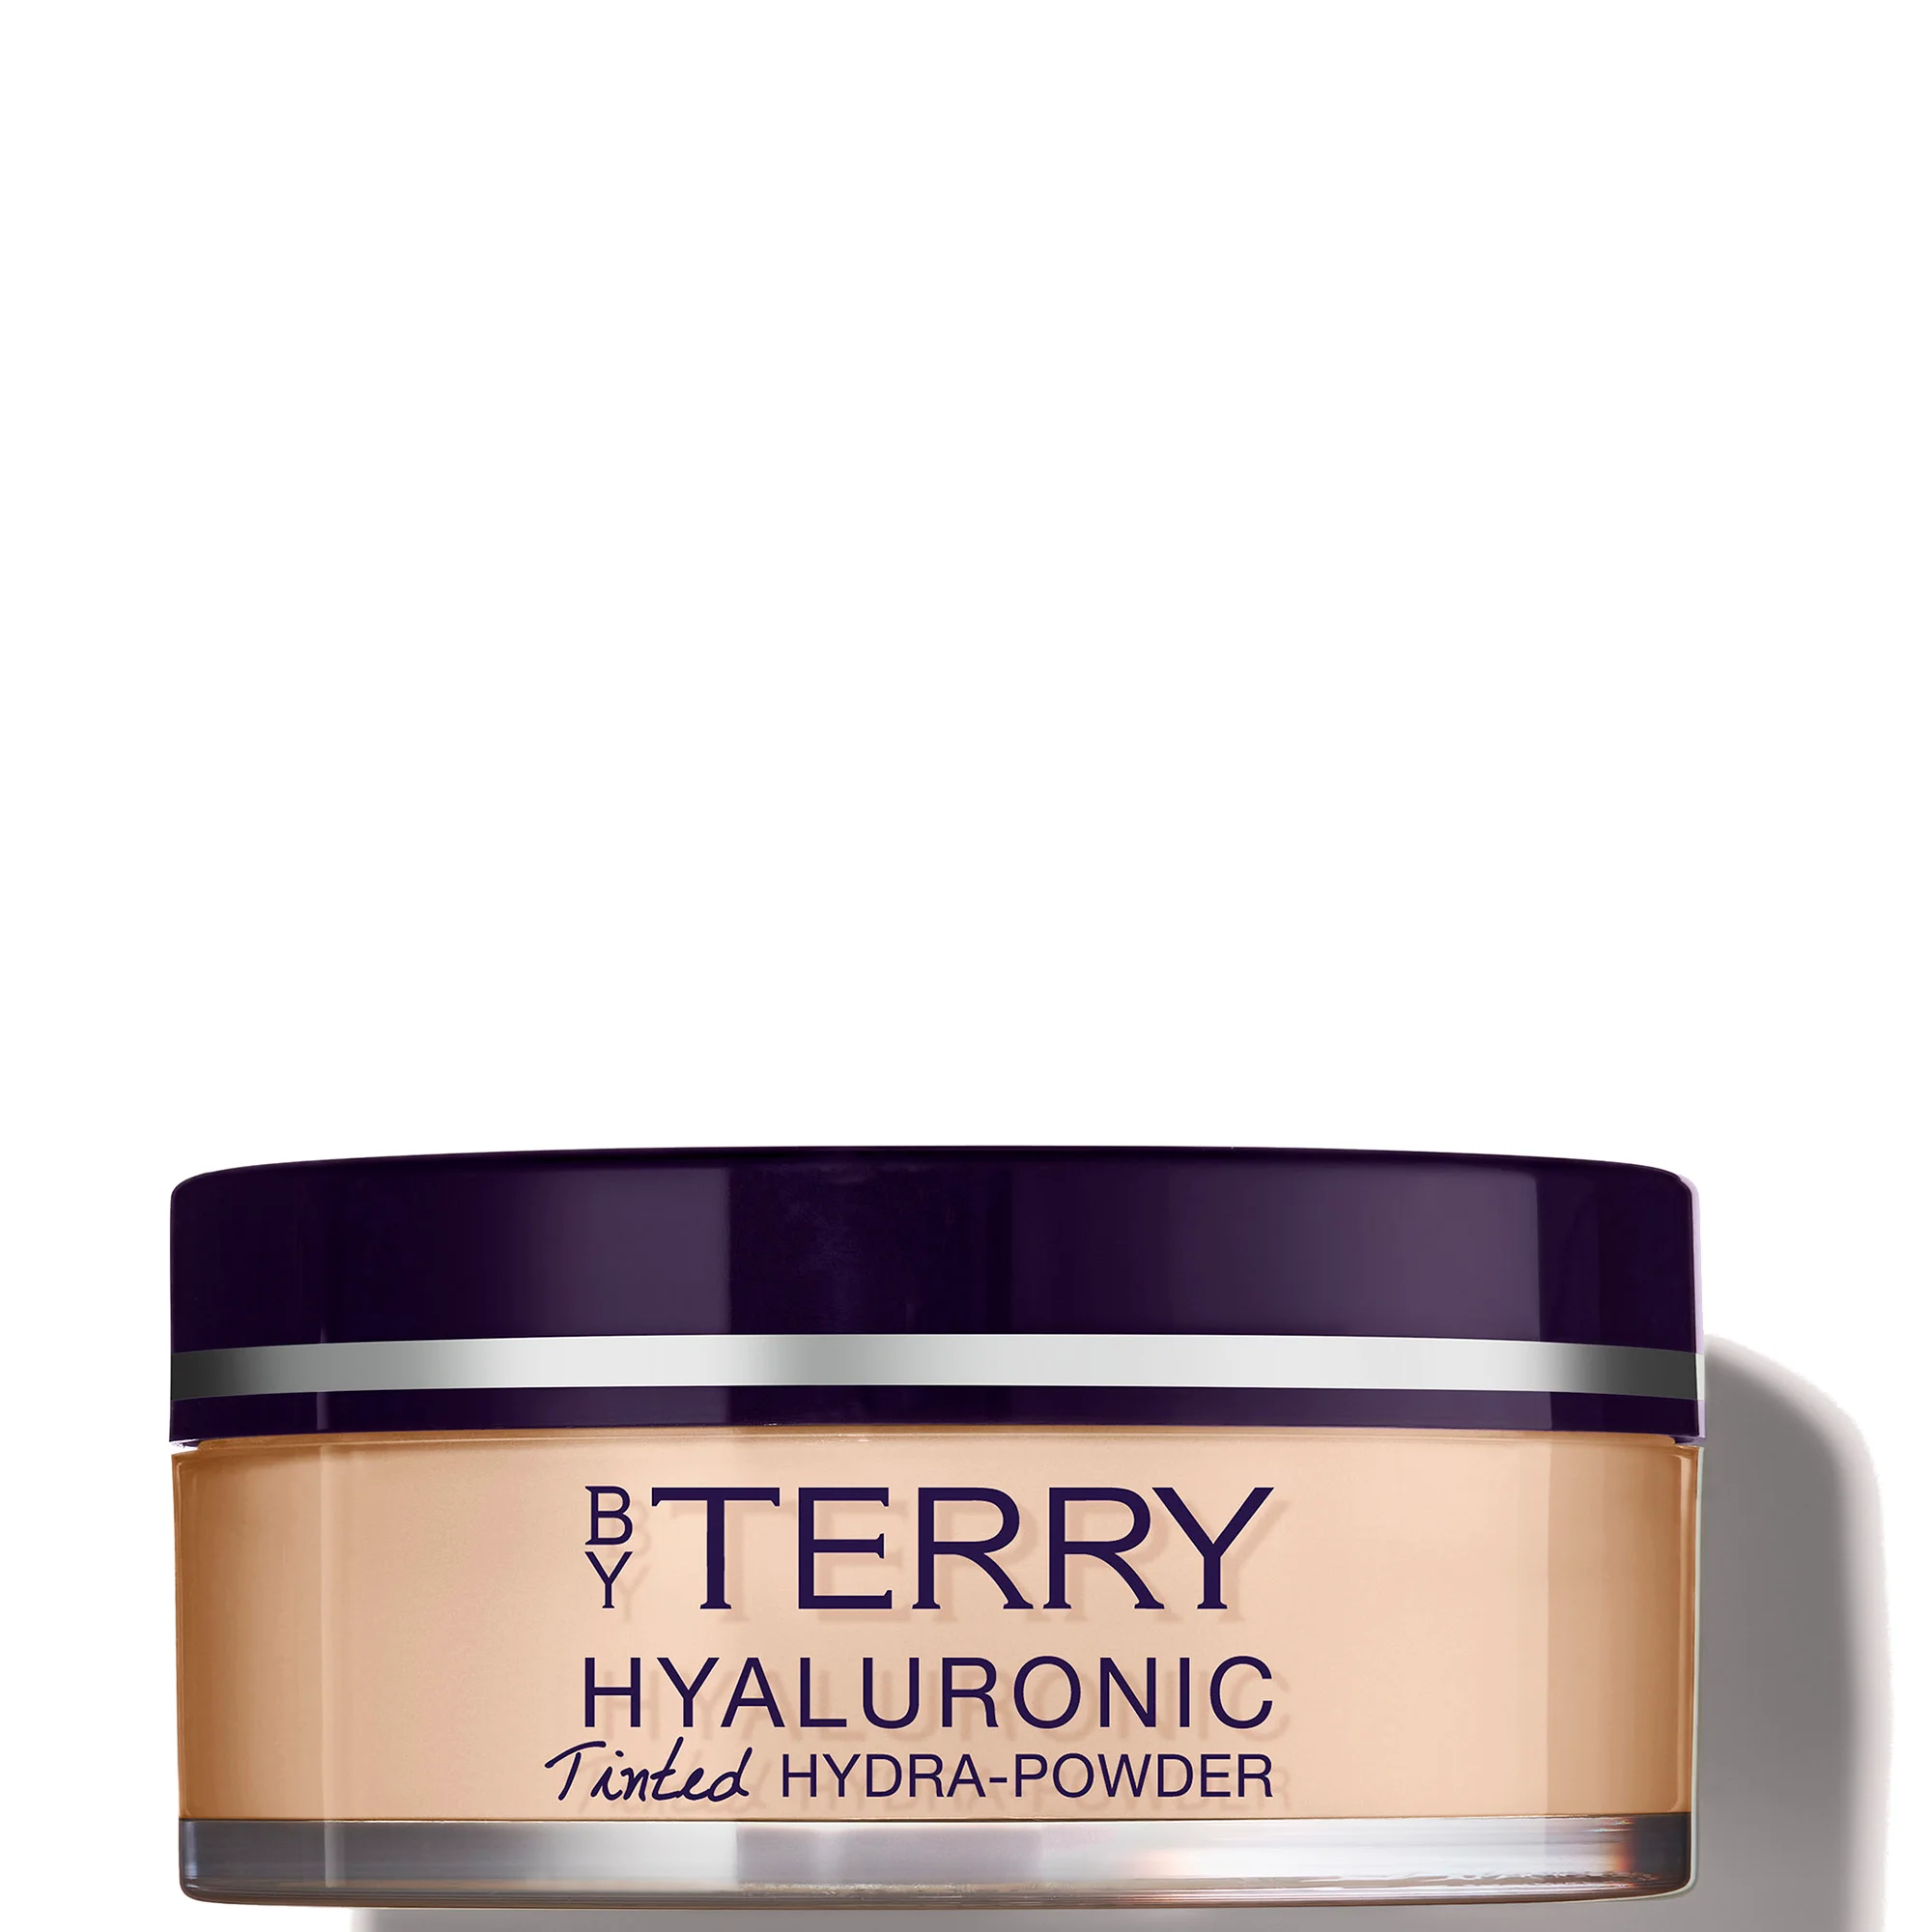 By Terry Hyaluronic Tinted Hydra-Powder 10g (Various Shades) Image 1